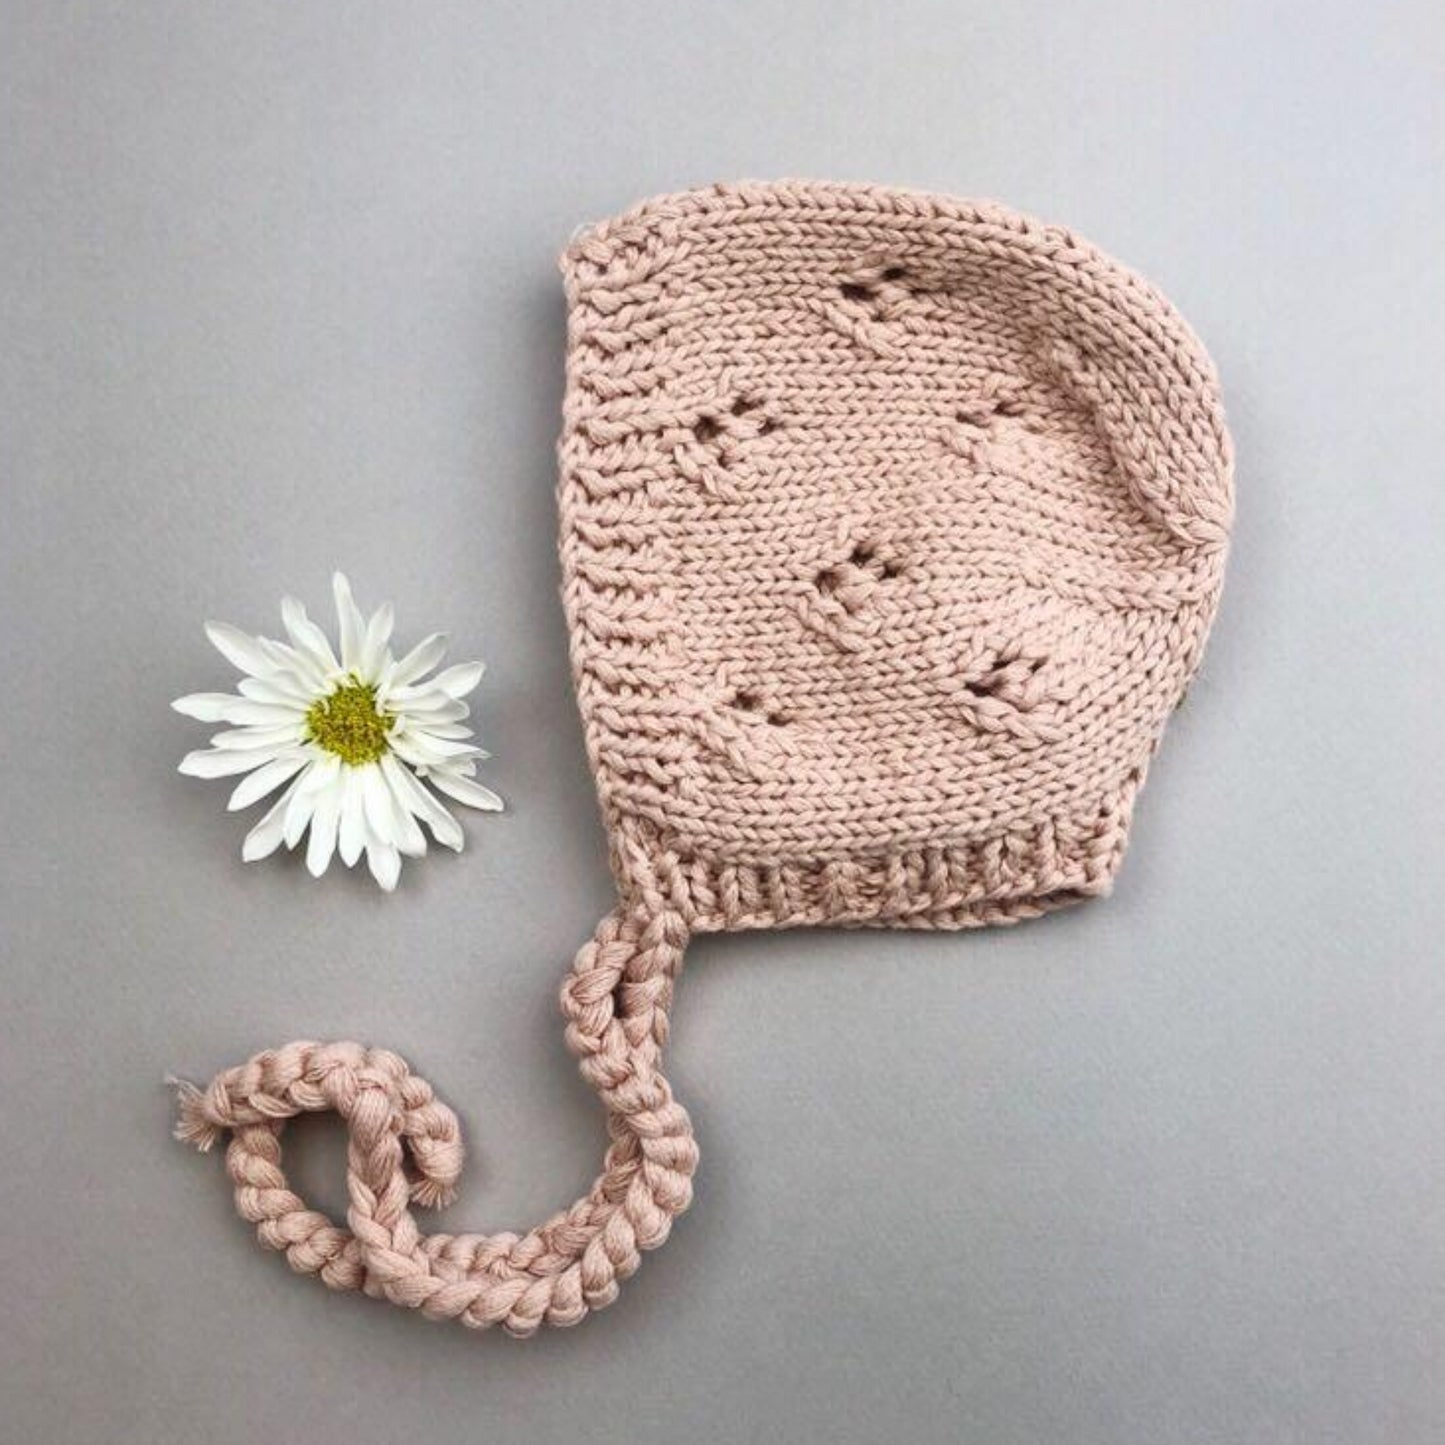 hand knit dusty pink cotton bonnet with openwork stitching and tie closure